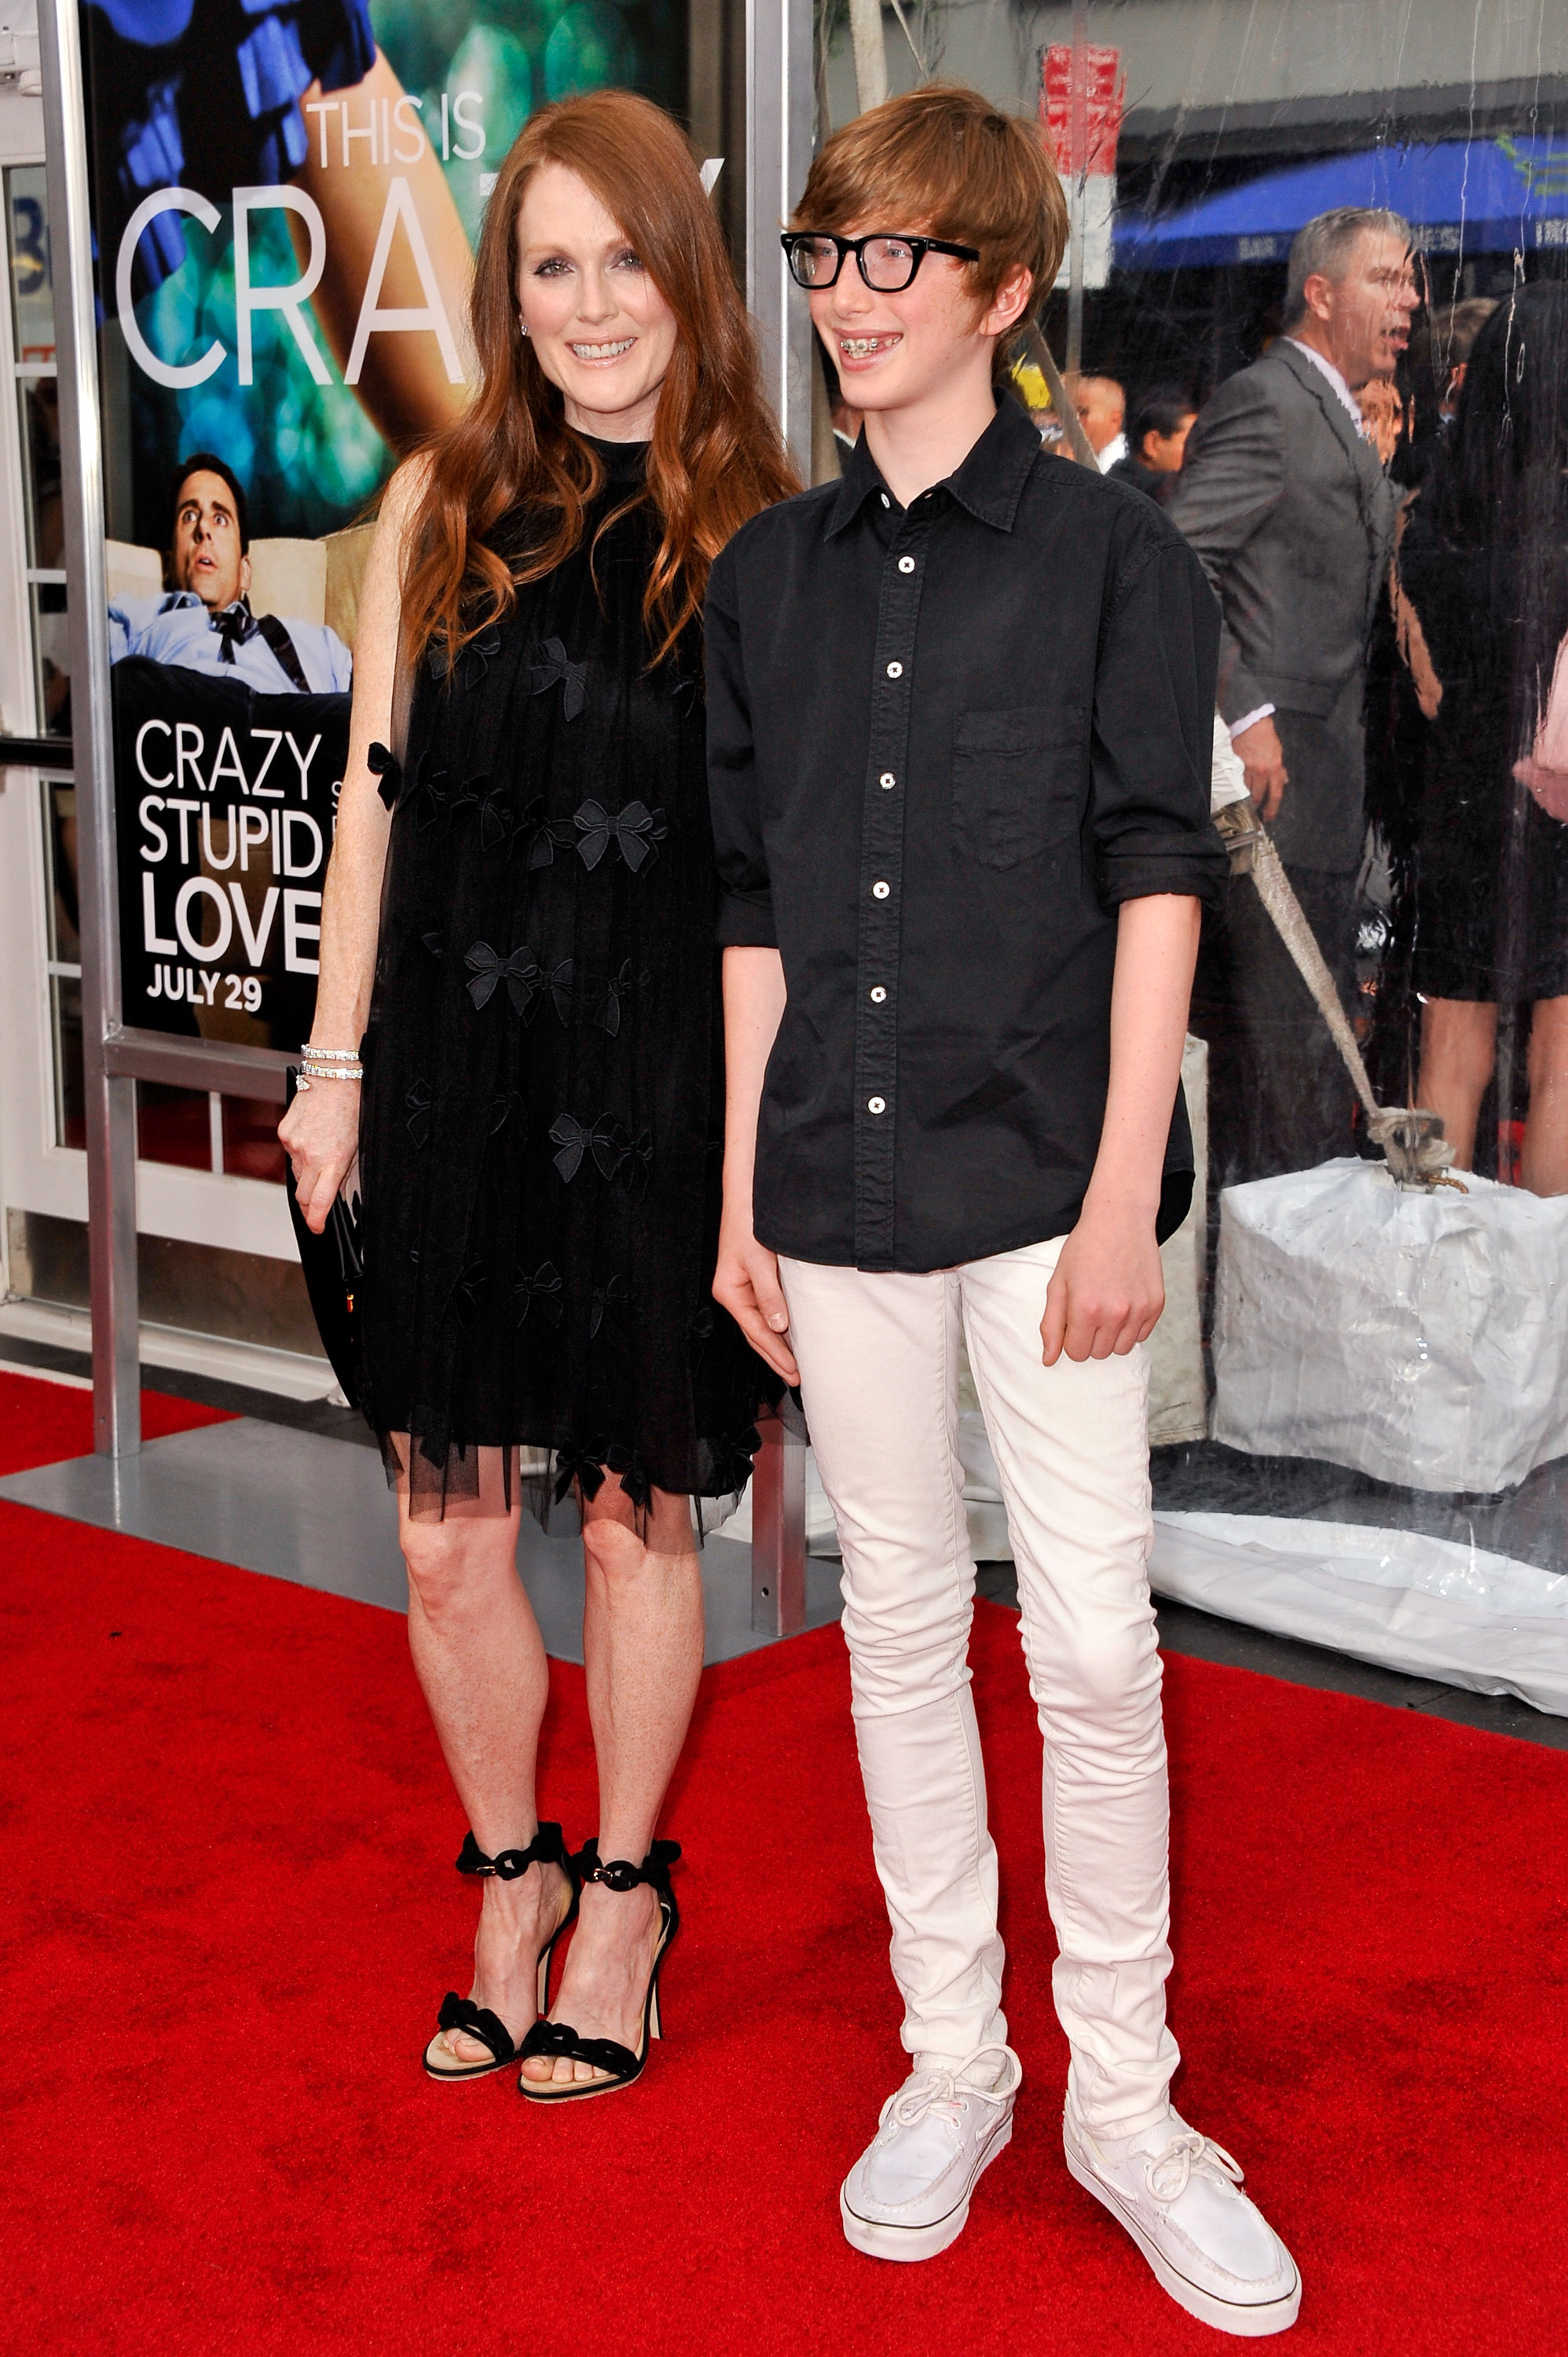 Julianne Moore and her son Caleb Freundlich on the red carpet at the "Crazy, Stupid, Love" world premiere on July 19, 2011, in New York City | Source: Getty Images